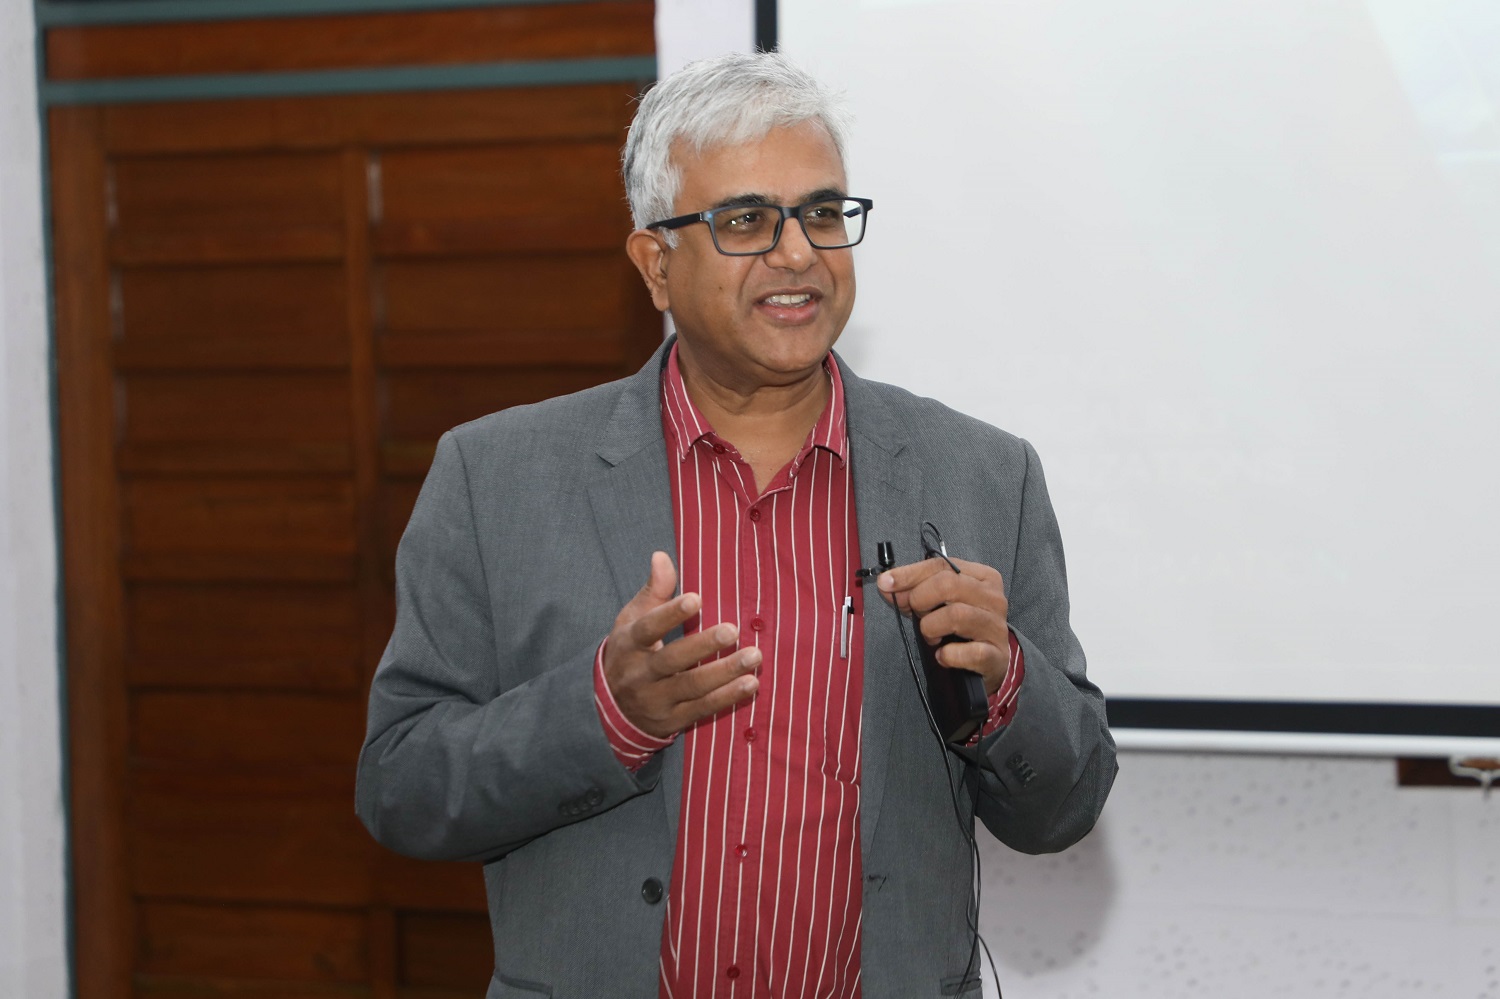 S Parthasarathy, Chief Programme Officer, Executive Education Programmes, IIMB, delivers the welcome address.